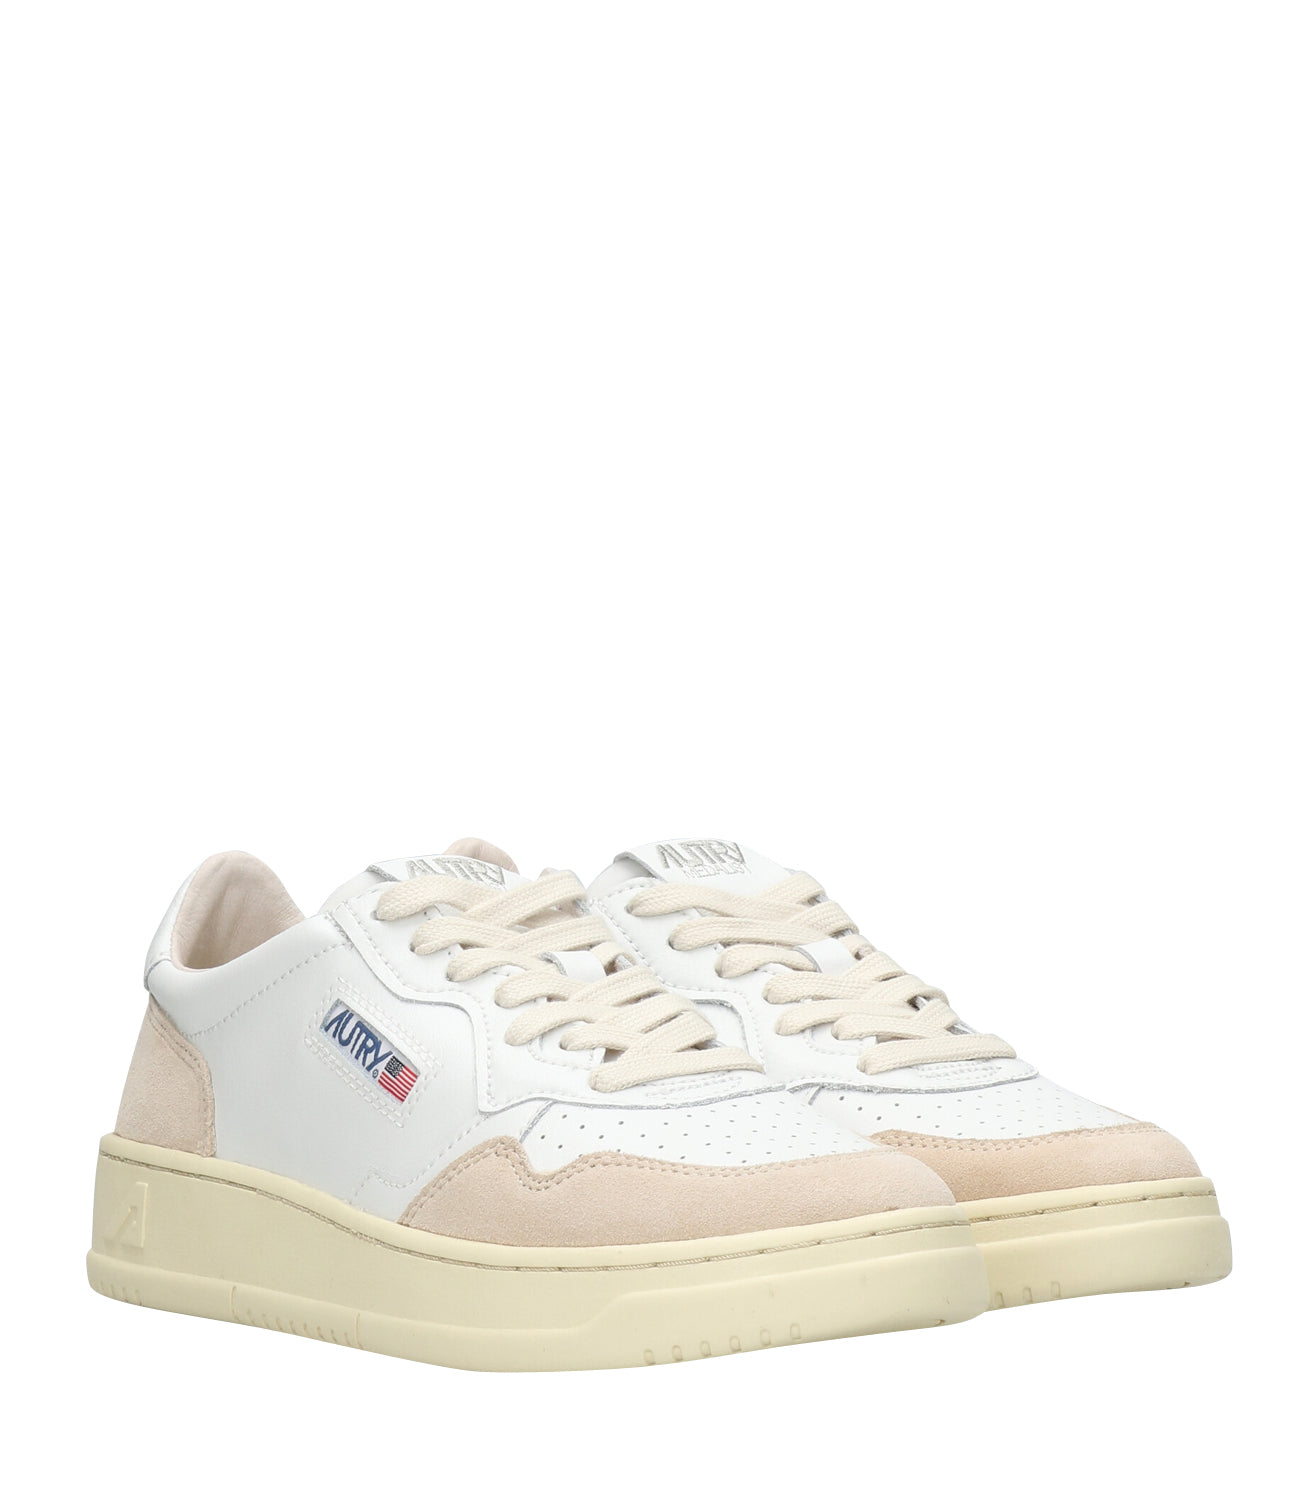 Autry | Sneakers Medalist Low Bianca e Rosa